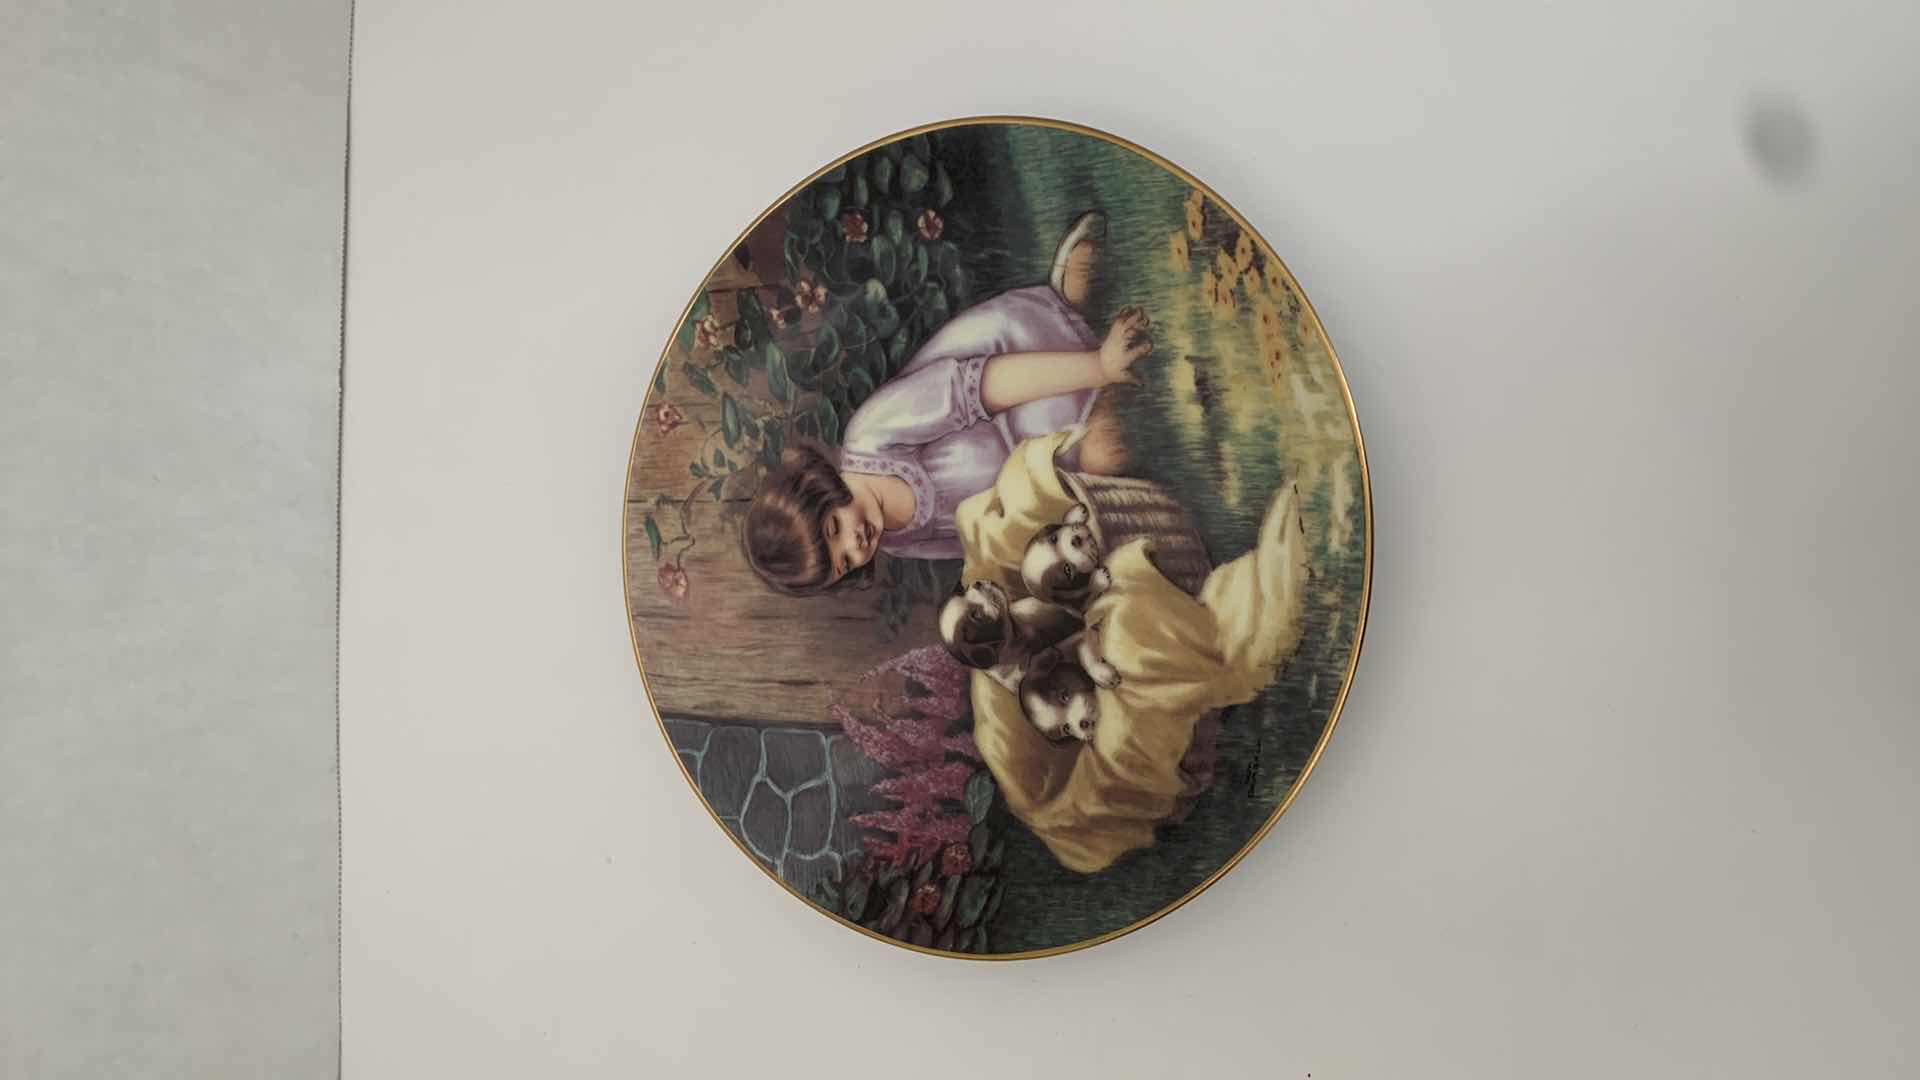 Photo 1 of MM GRIMBALL “A BASKET FULL” PLATE 9” WIDE